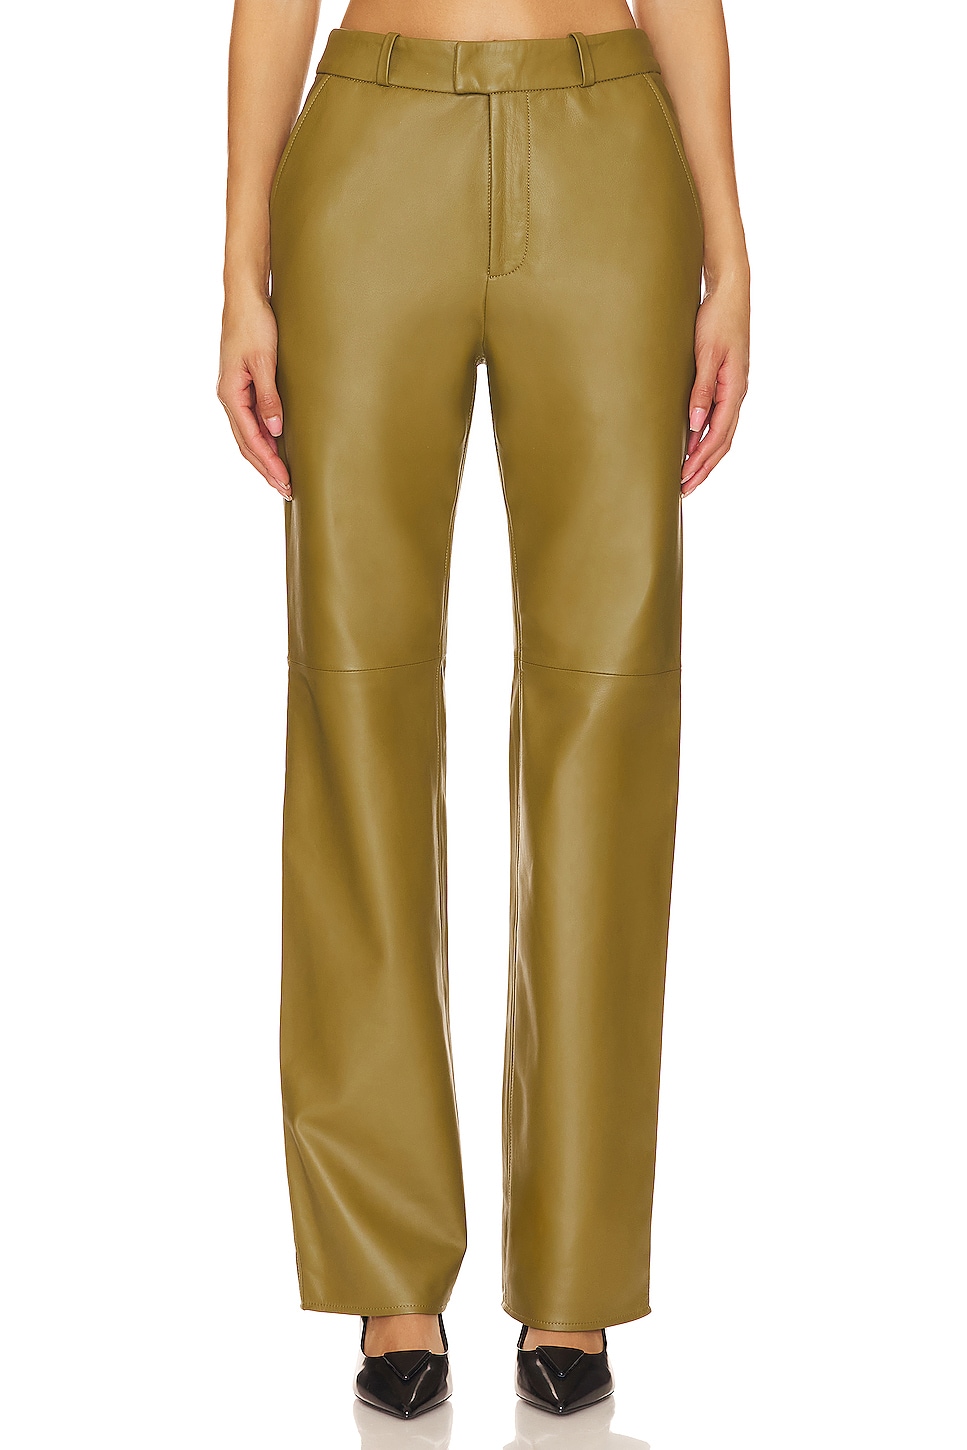 Cinq a Sept Embellished Collins Pant in Moss